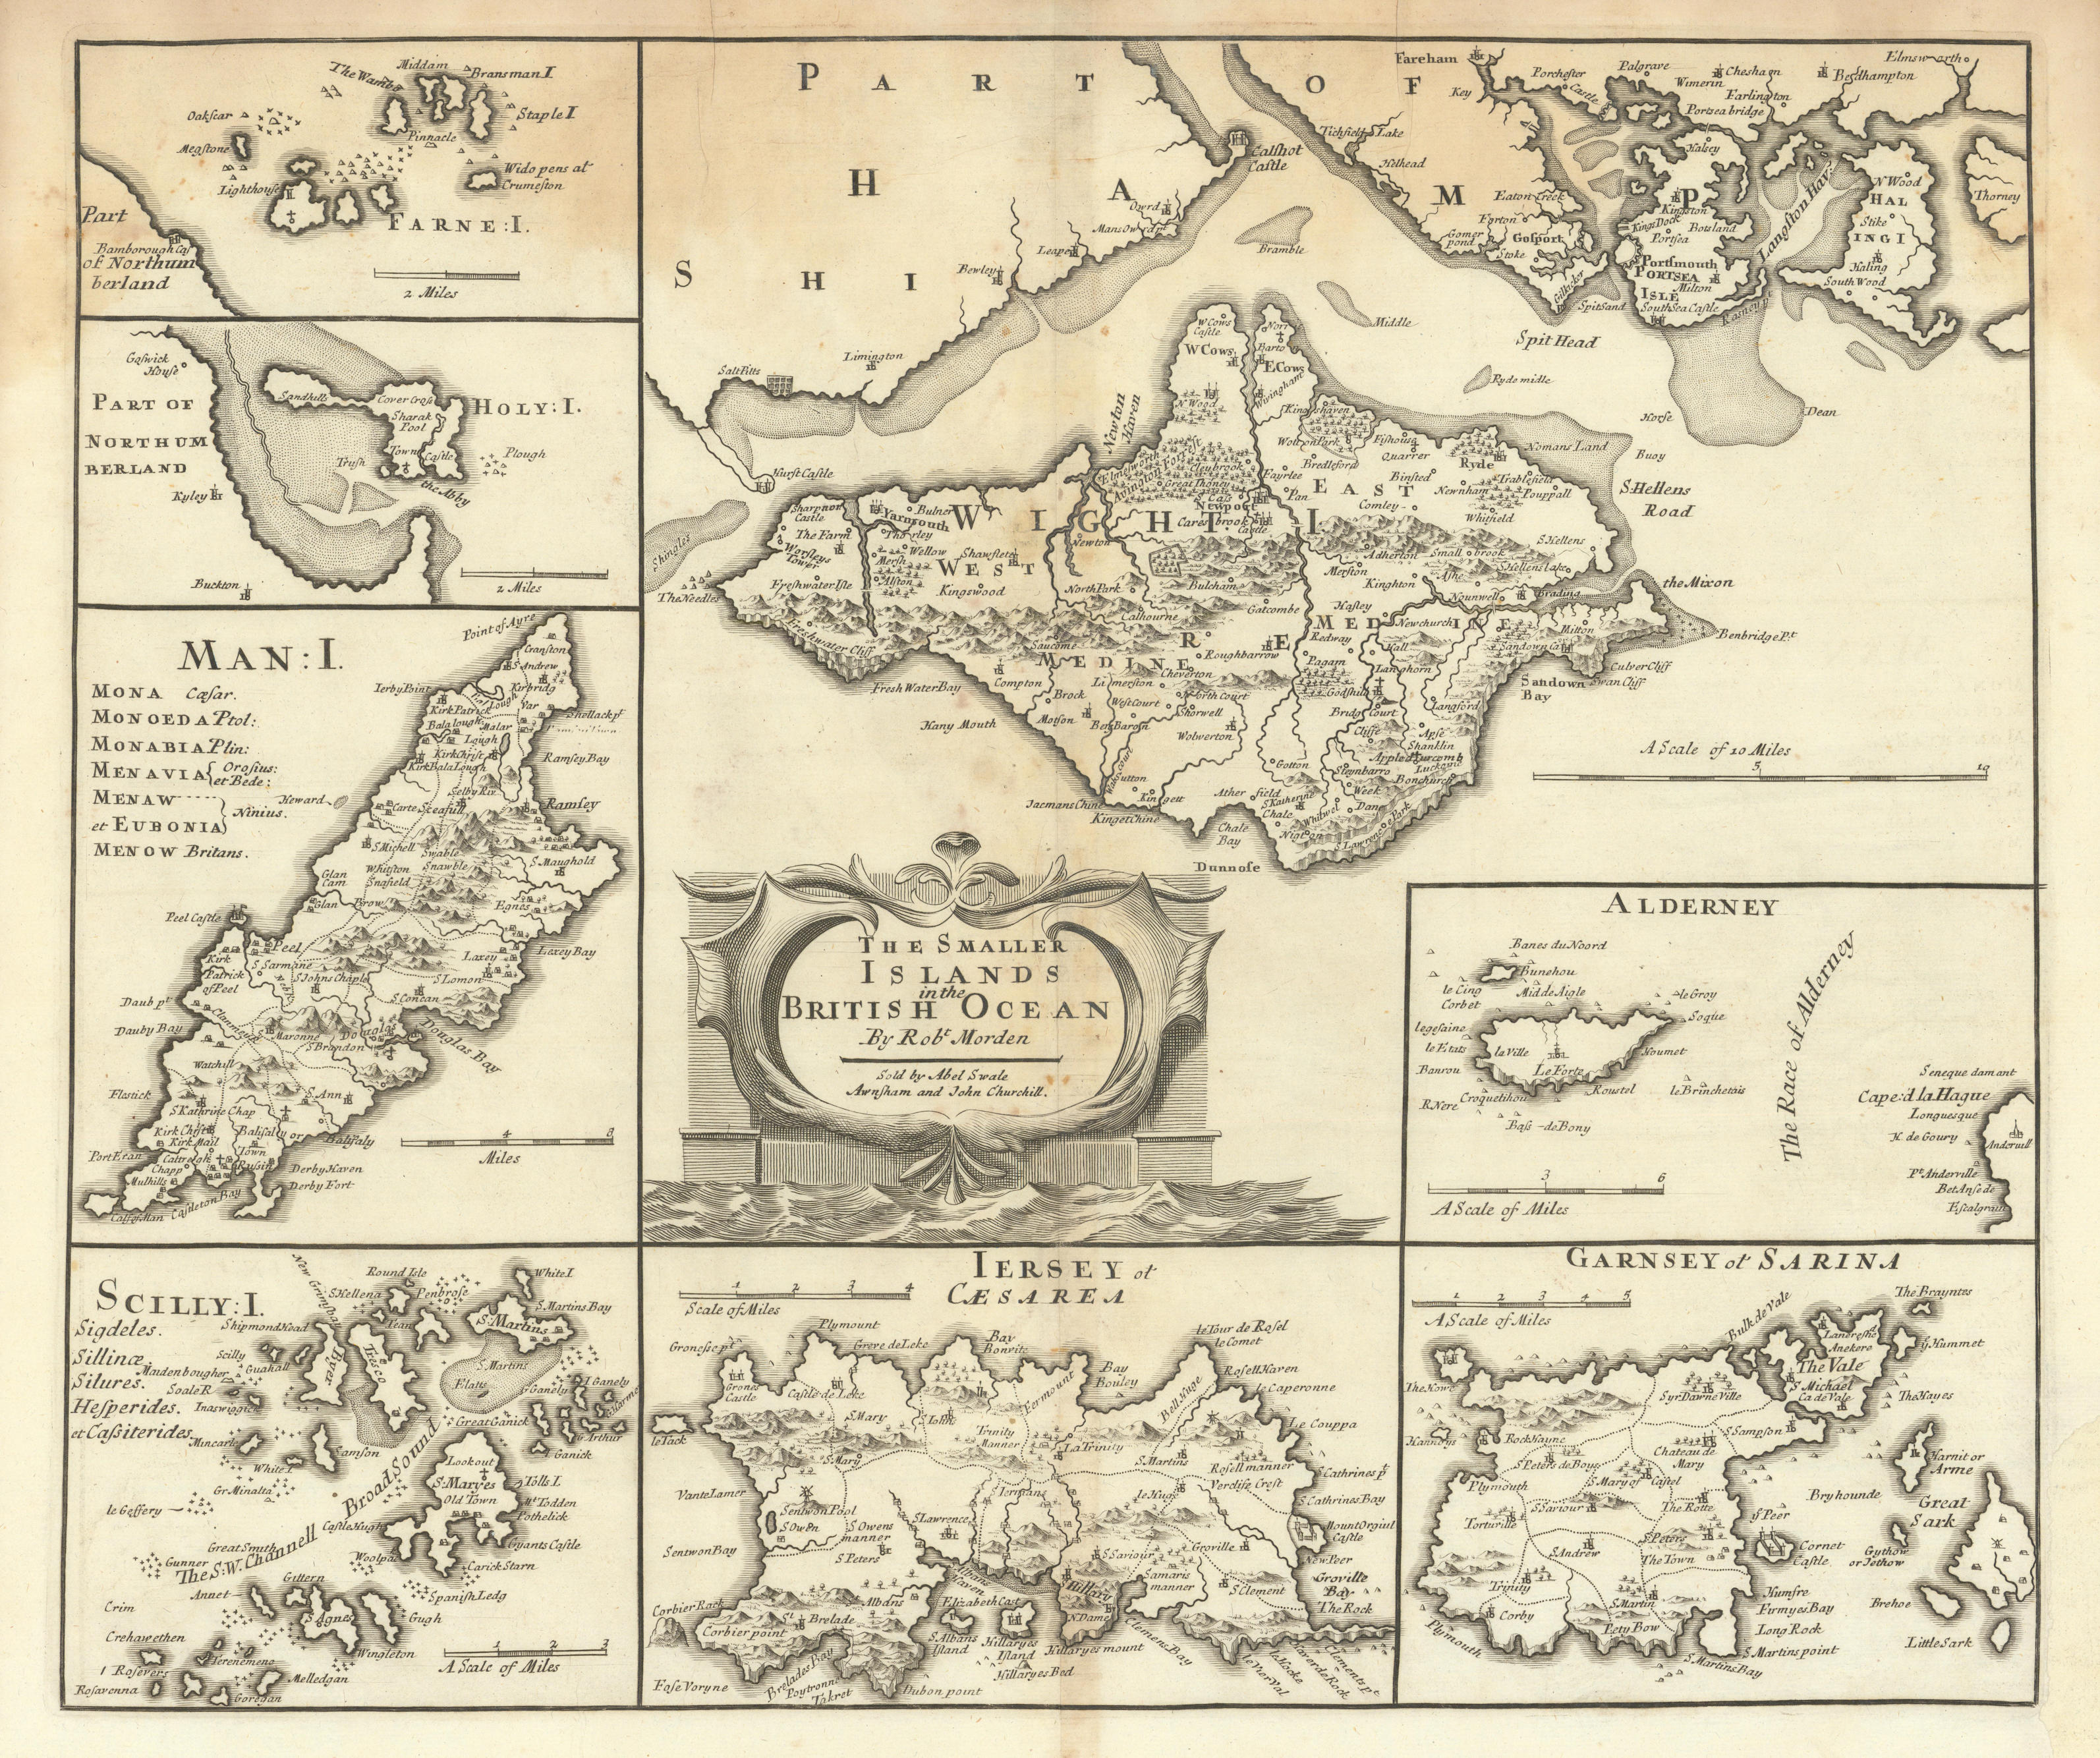 Associate Product ENGLAND. Isles of Wight/Man Scilly Isles Farne/Channel Islands. MORDEN 1695 map